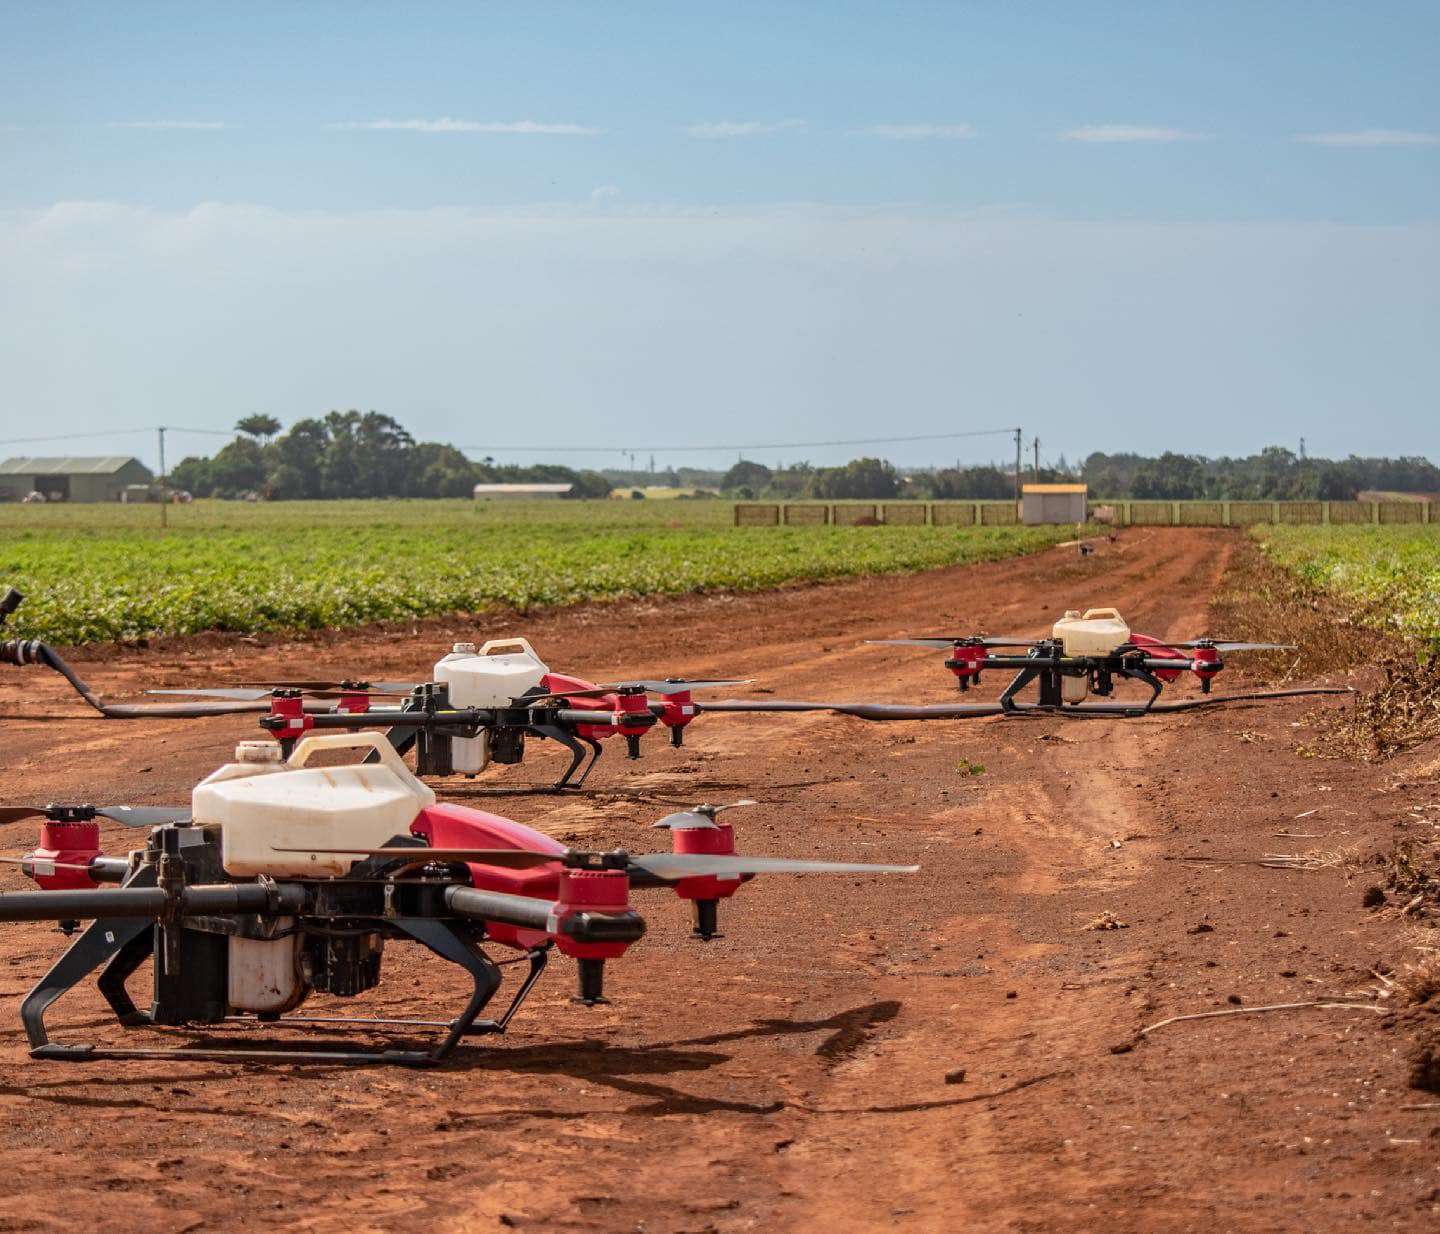 XAG Agricultural Drone swarm ready to take off